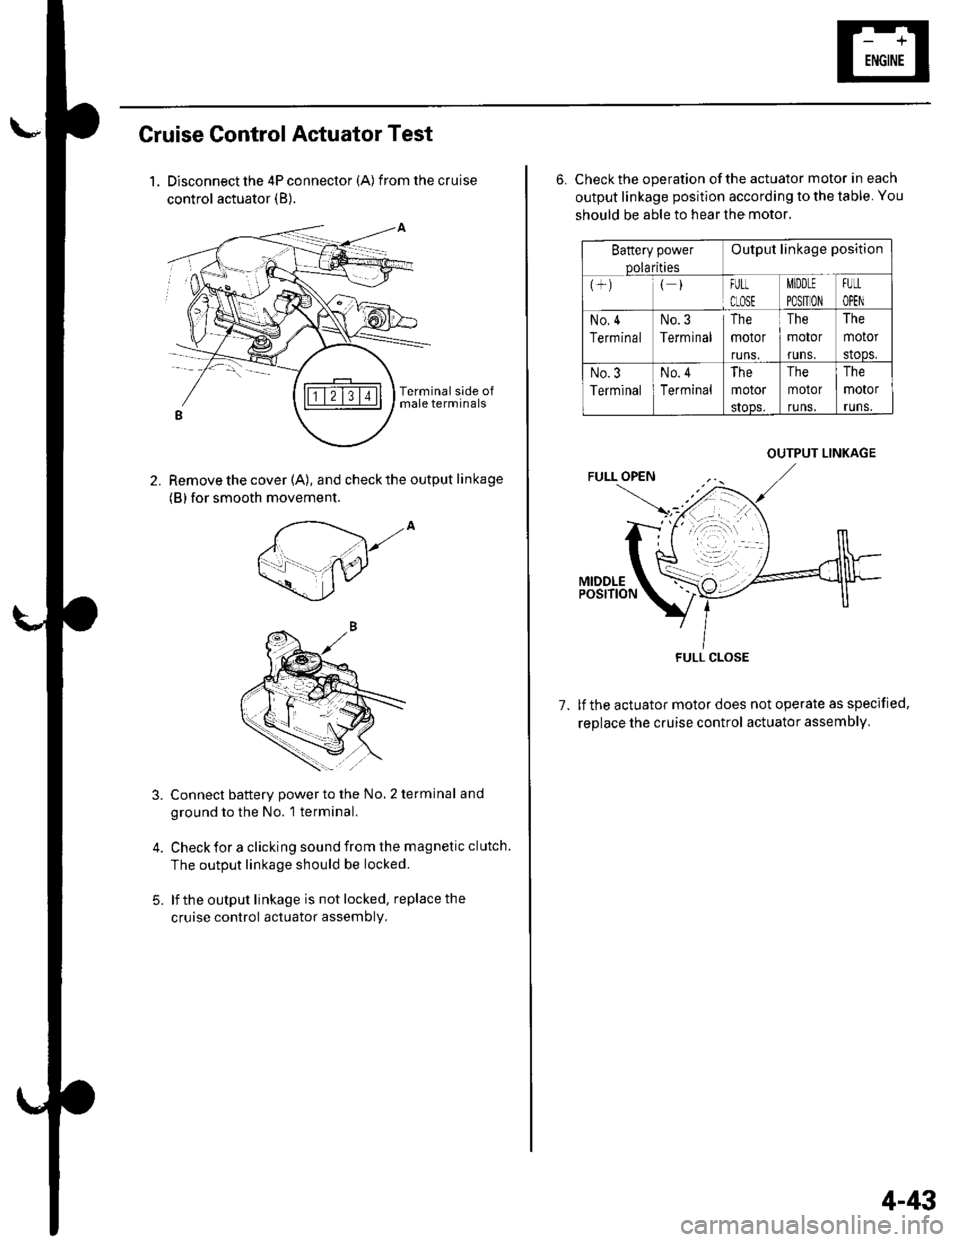 HONDA CIVIC 2003 7.G Workshop Manual Cruise Control Actuator Test
1. Disconnect the 4P connector (A) from the cruise
control actuator (B).
Remove the cover (A), and check the output linkage
(B) for smooth movement.
2.
,to
5.
Connect batt